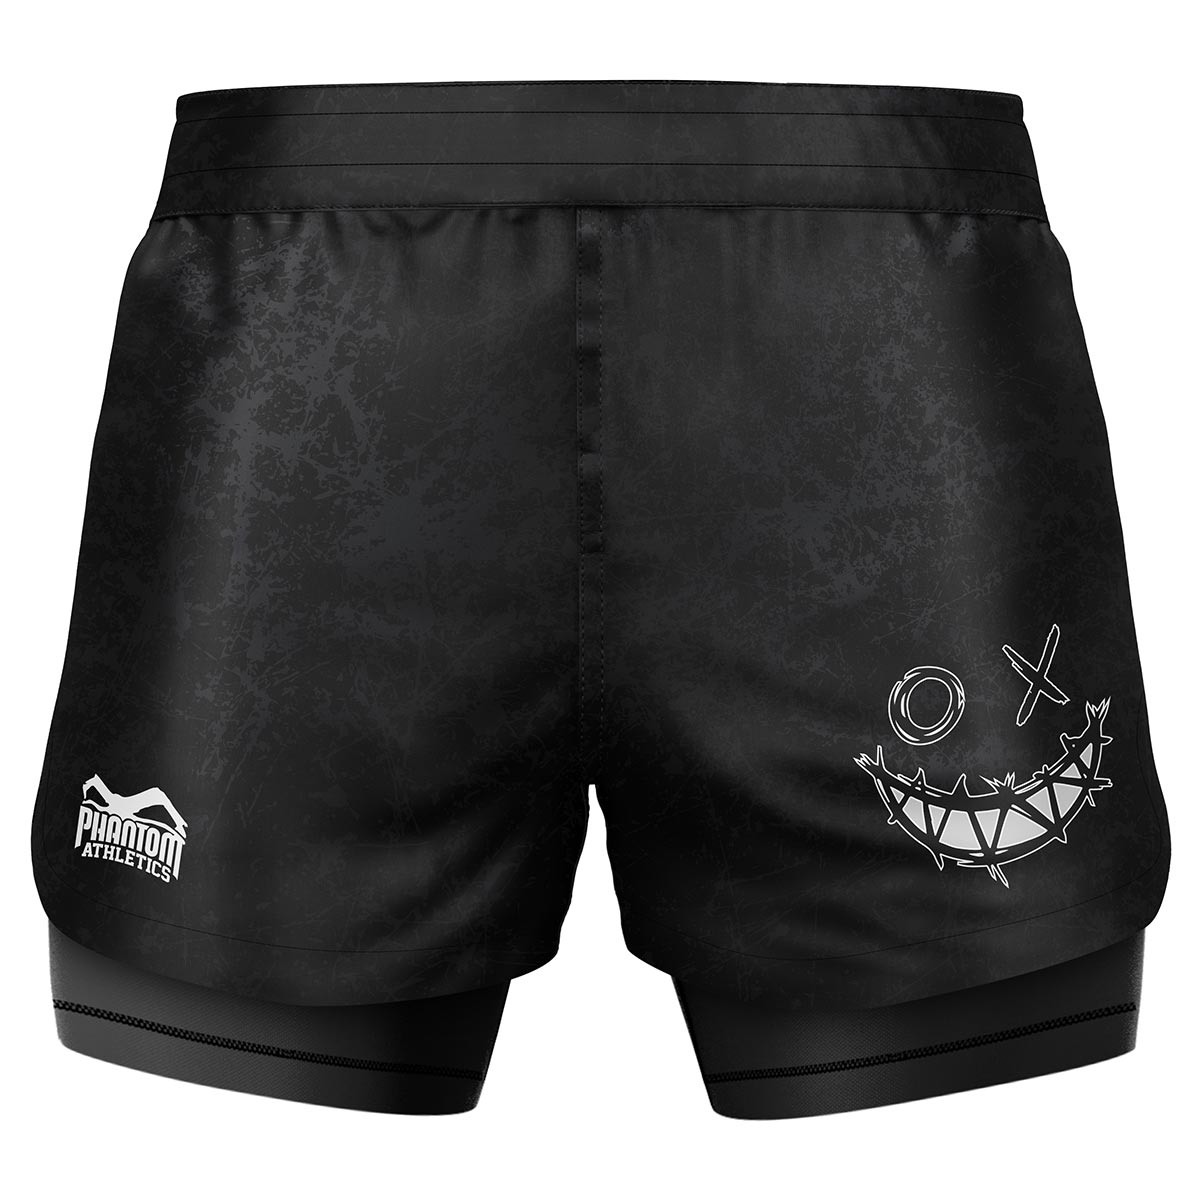 Phantom Fightshorts Fusion 2in1. Ultimate shorts for your martial arts with integrated compression shorts. Ideal for MMA, BJJ, wrestling, grappling or Muay Thai. In black with serious smiley design.